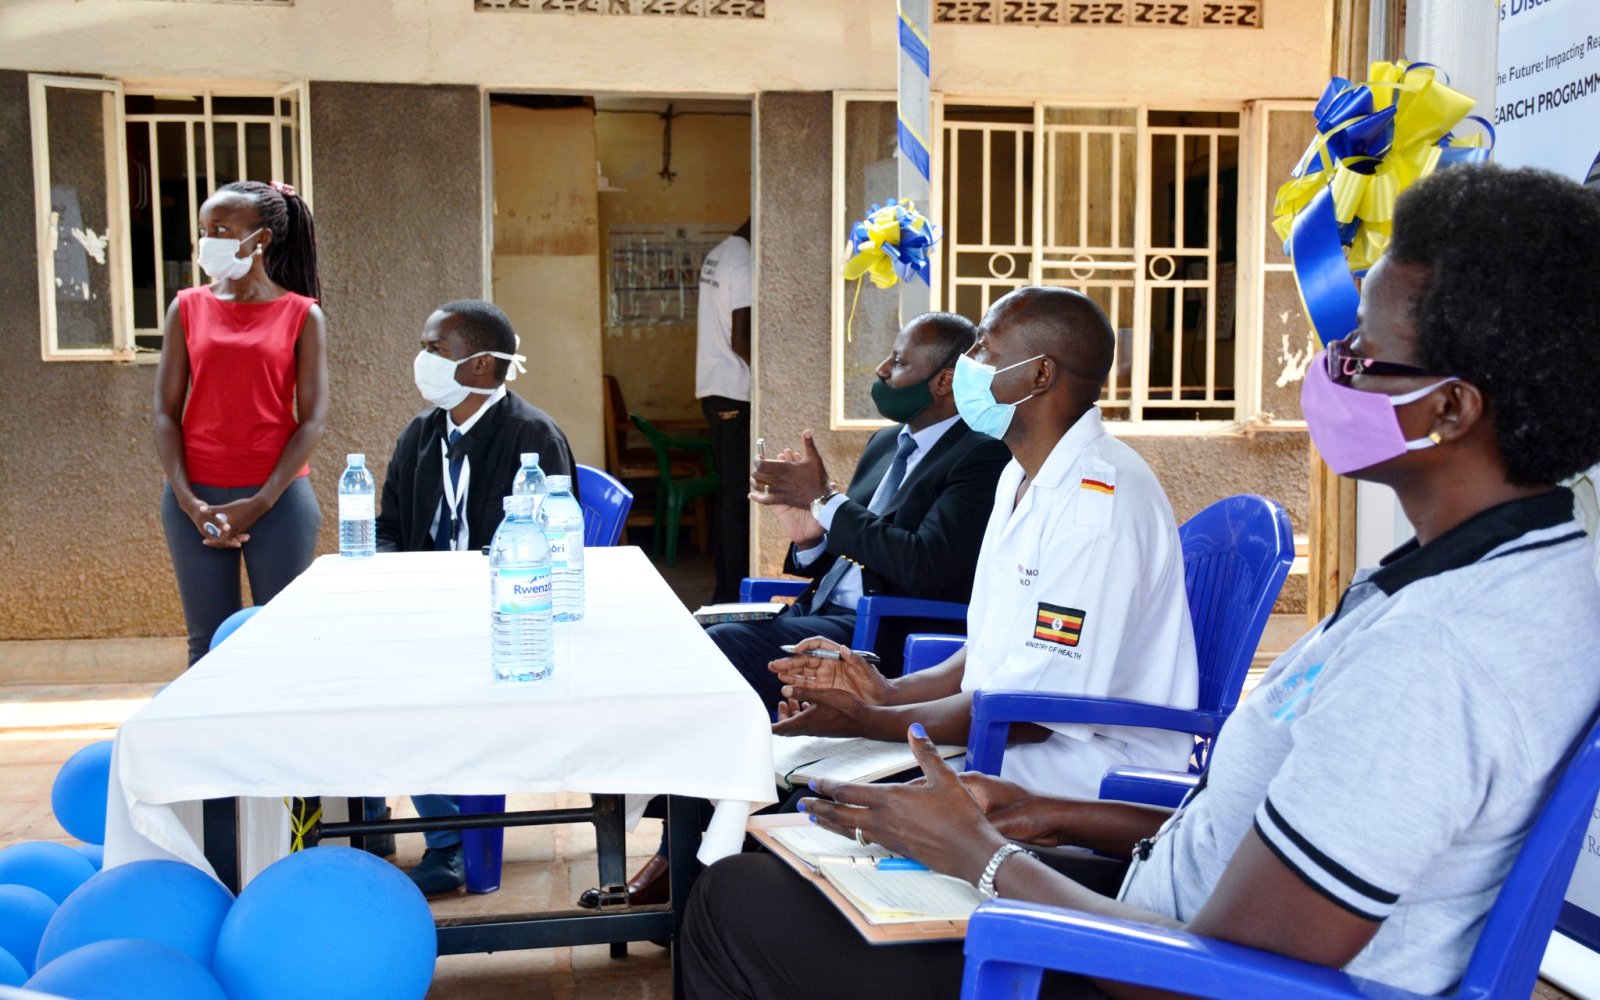 The Executive Director IDI-Dr. Andrew Kambugu (3rd R), In-Charge Kitebi HCIII-Mr. Kembo Moses (2nd R) and other officials listen to proceedings during the handover ceremony of the "Obumu Study" Gazebo and waiting shed in Rubaga Division, Kampala District on 13th August 2020. Photo credit: IDI